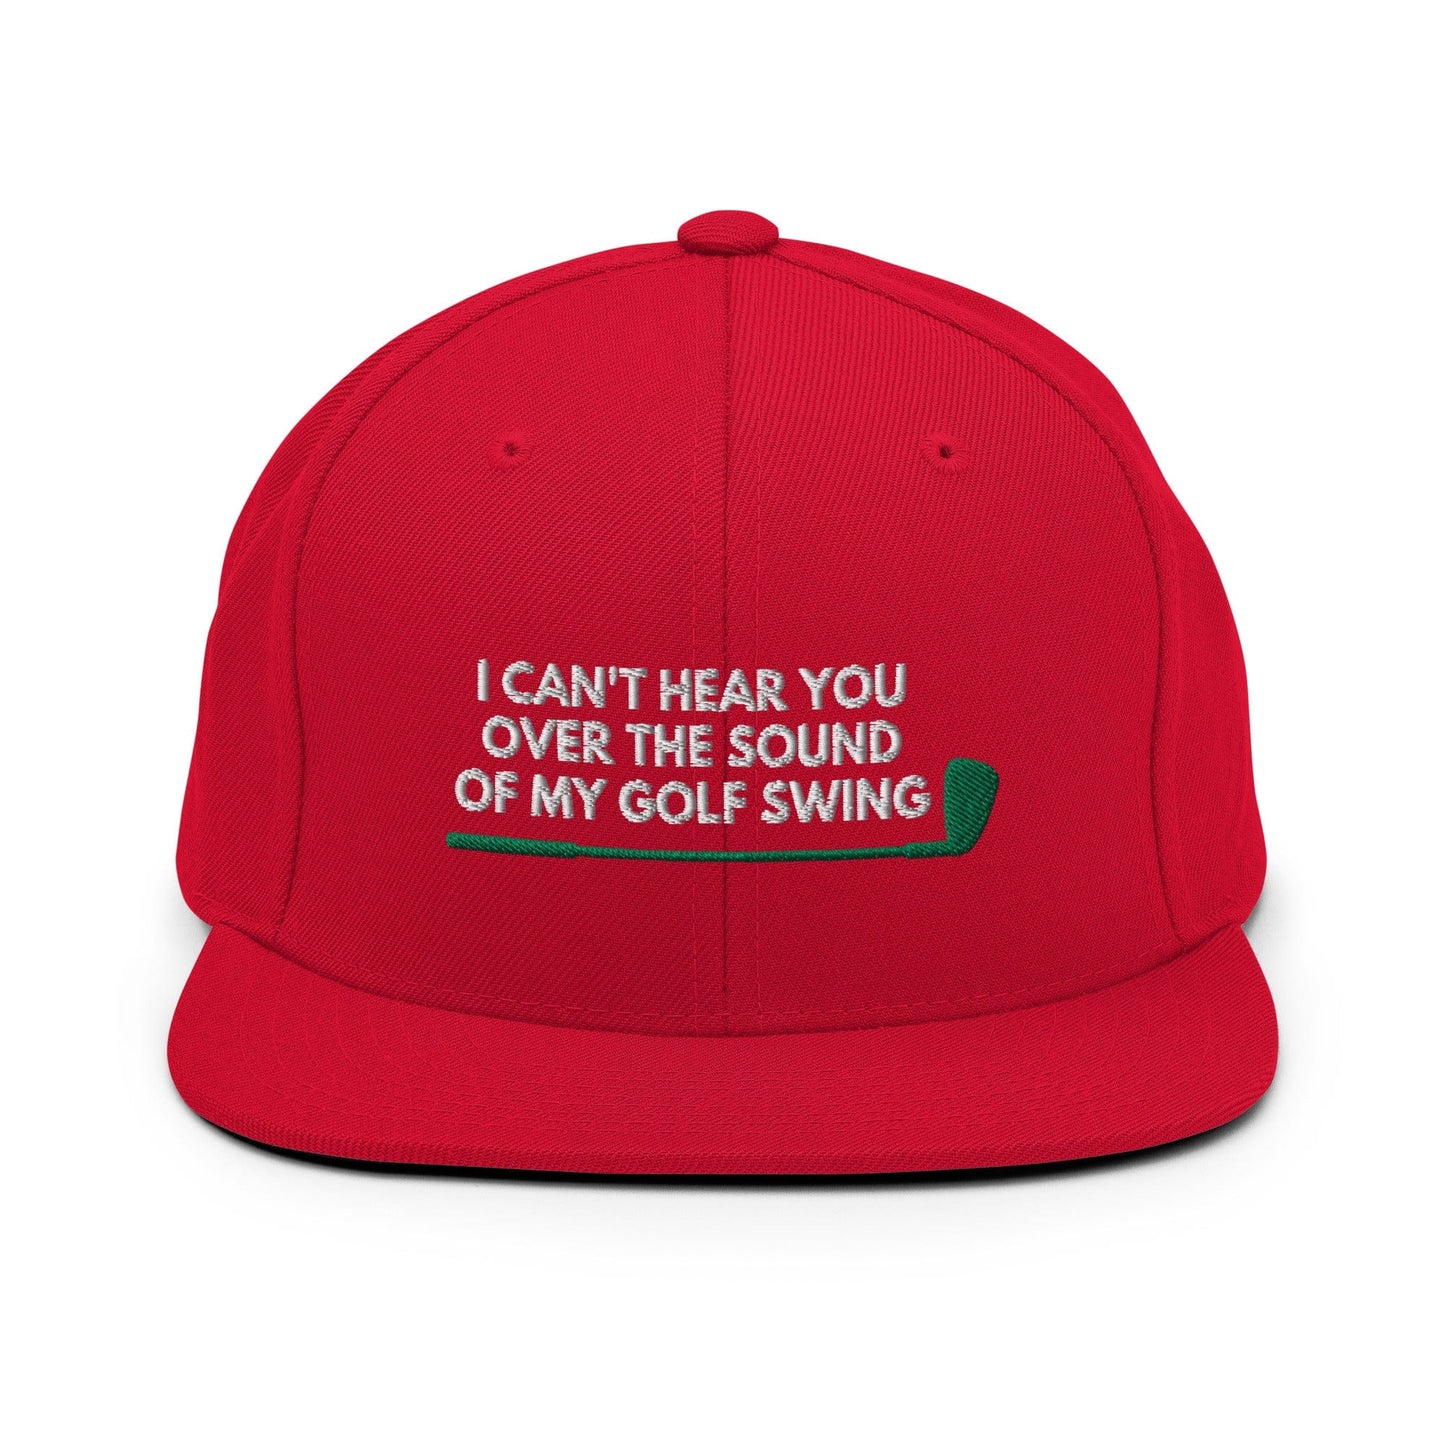 Funny Golfer Gifts  Snapback Hat Red I Cant Hear You Over The Sound Of My Golf Swing Hat Snapback Hat